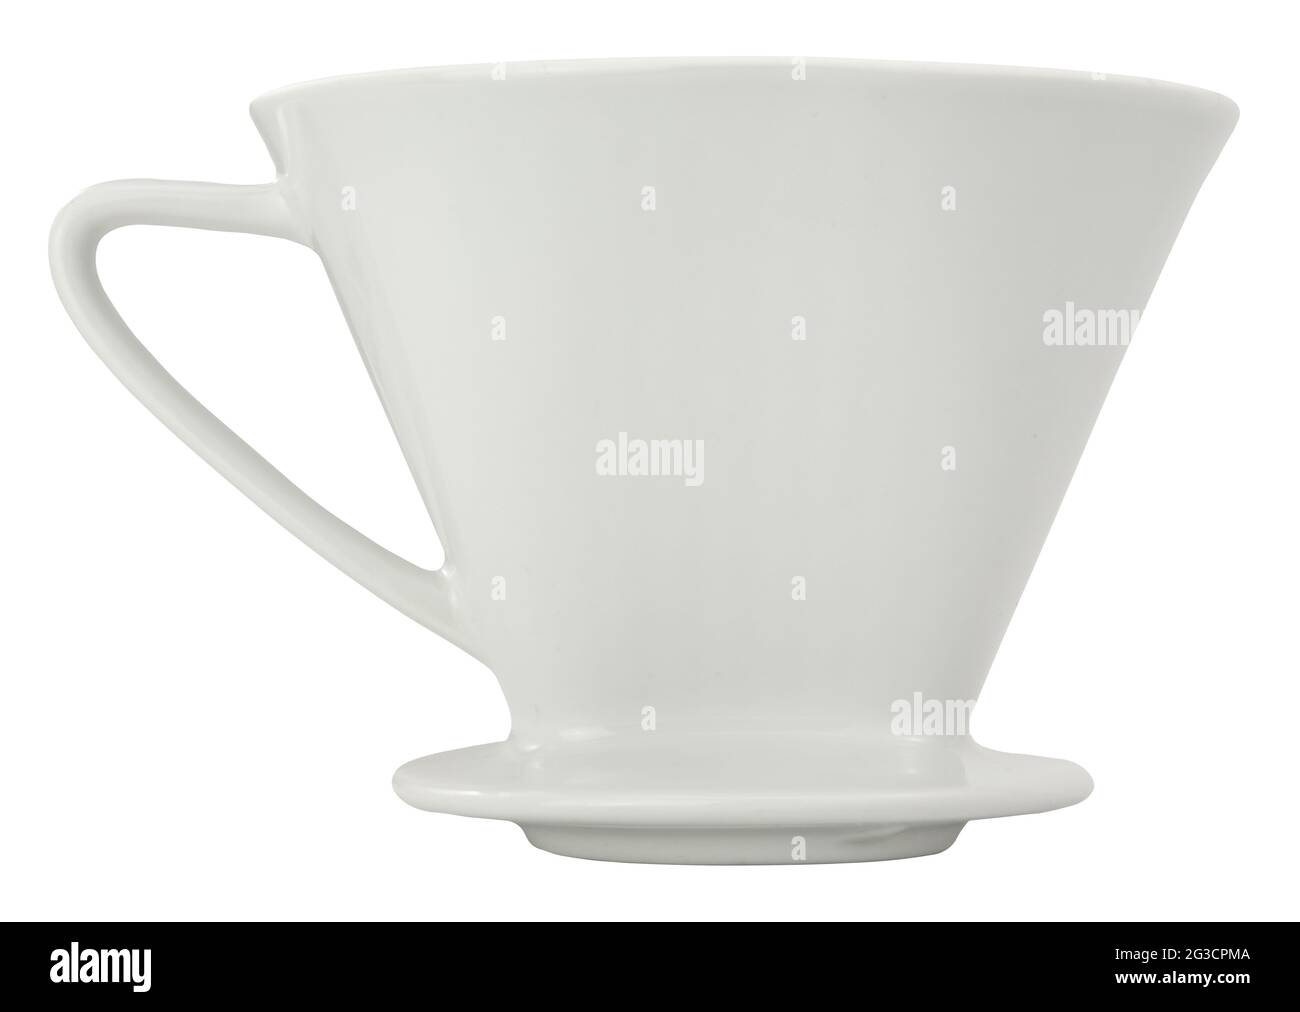 White Porcelain Coffee Filter Cone, Or Dripper, For Brewed Pour-Over Coffee Stock Photo